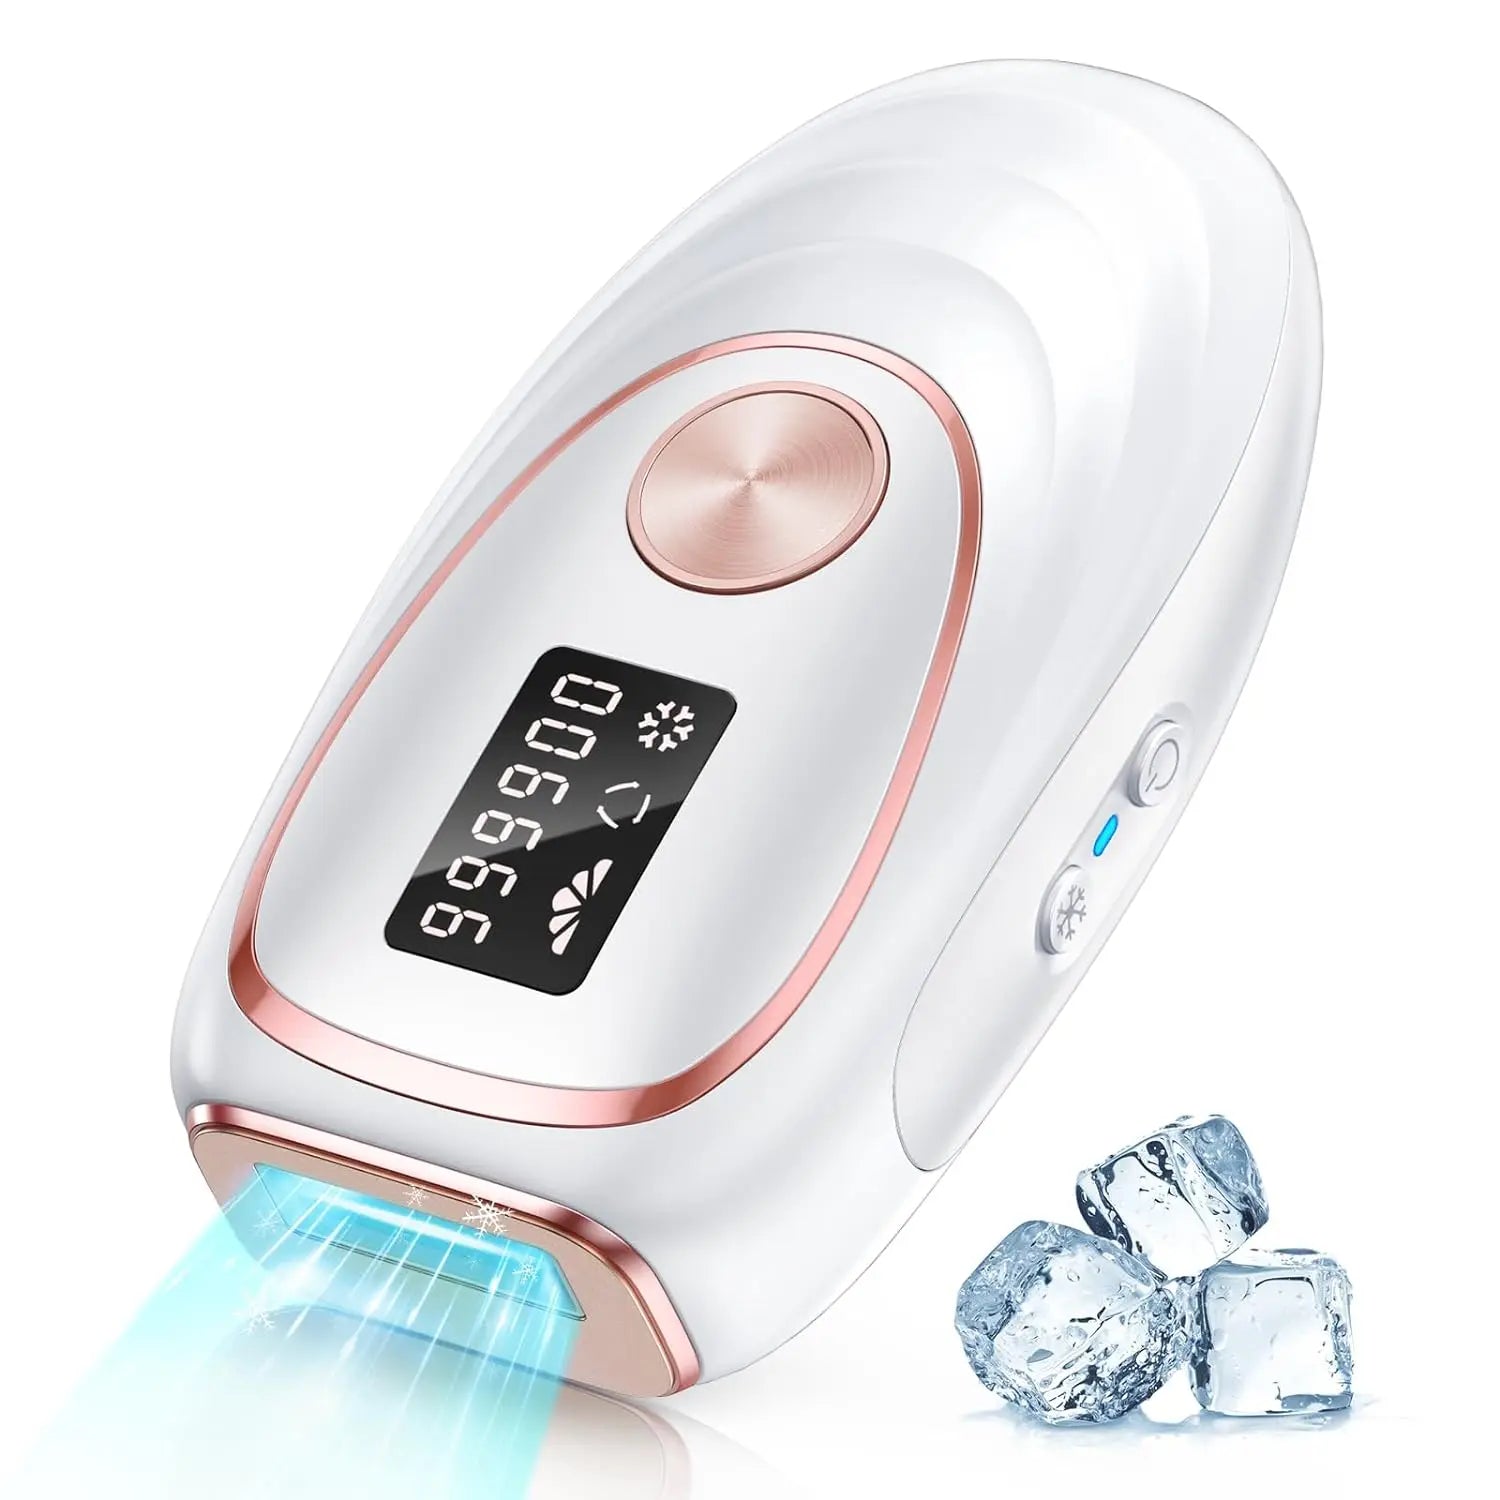 IPL Laser Hair Removal Epilator With Ice Colding 5 Levels 2 Modes 999900 Flashes Whole Body Treatment at Home For Men Women